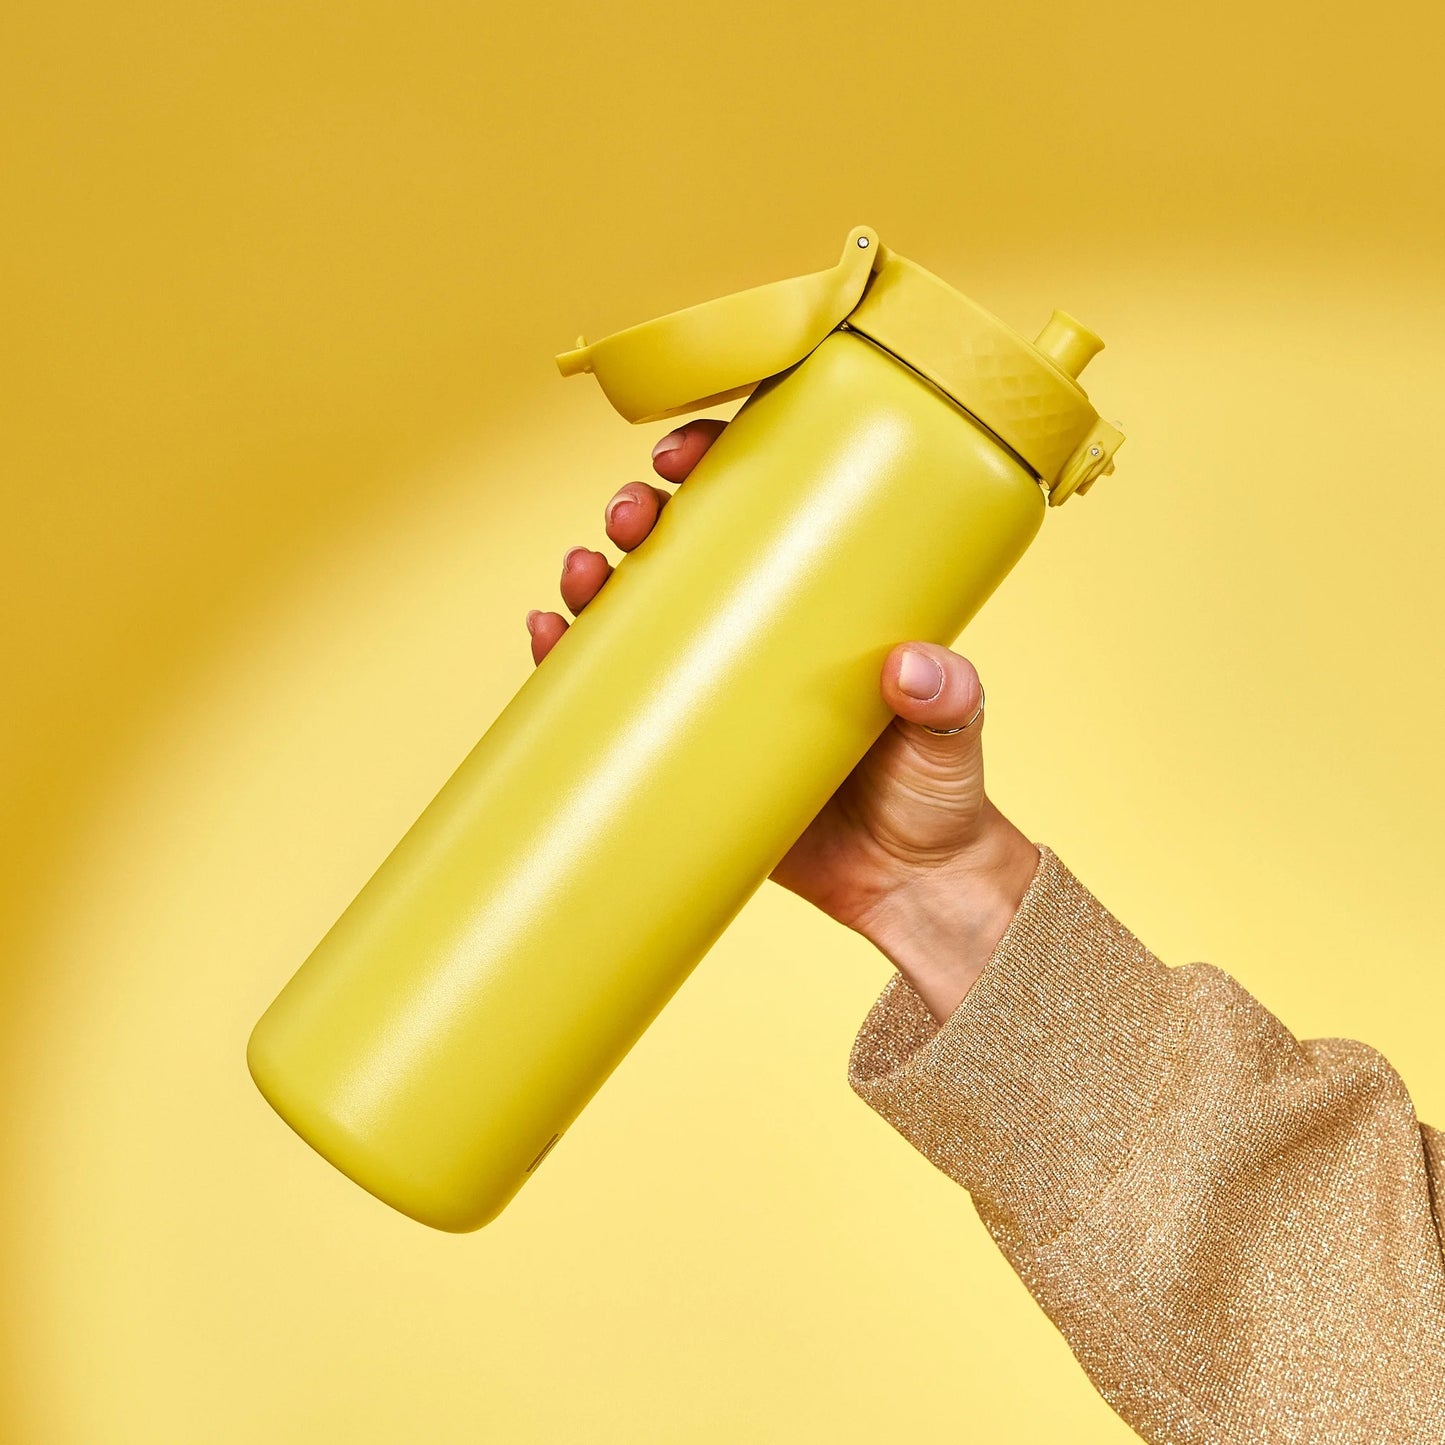 Leak Proof 1 Litre Thermal Water Bottle, Insulated Steel, Yellow, 1L